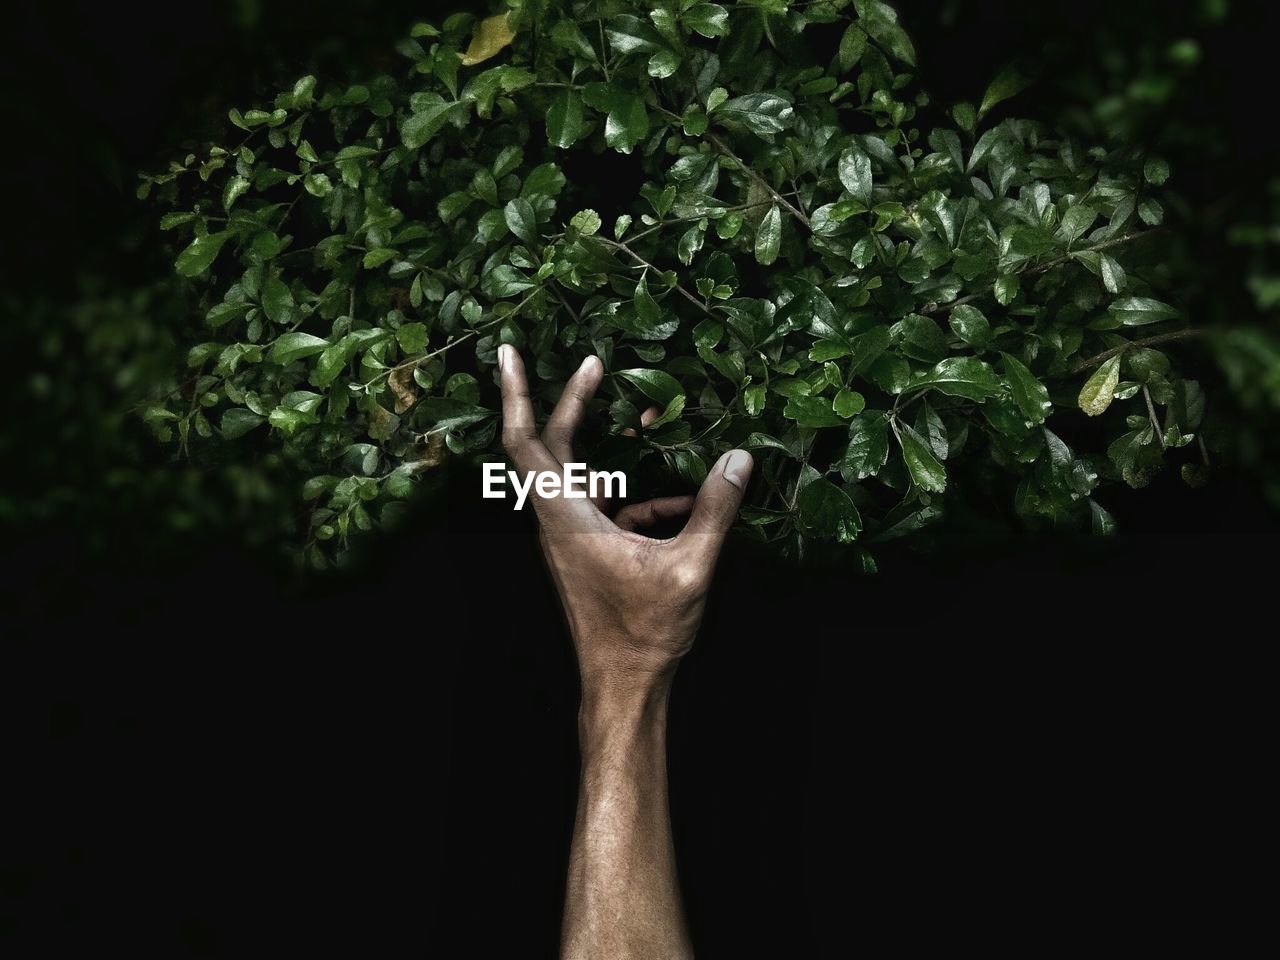 Cropped hand reaching towards plants against black background